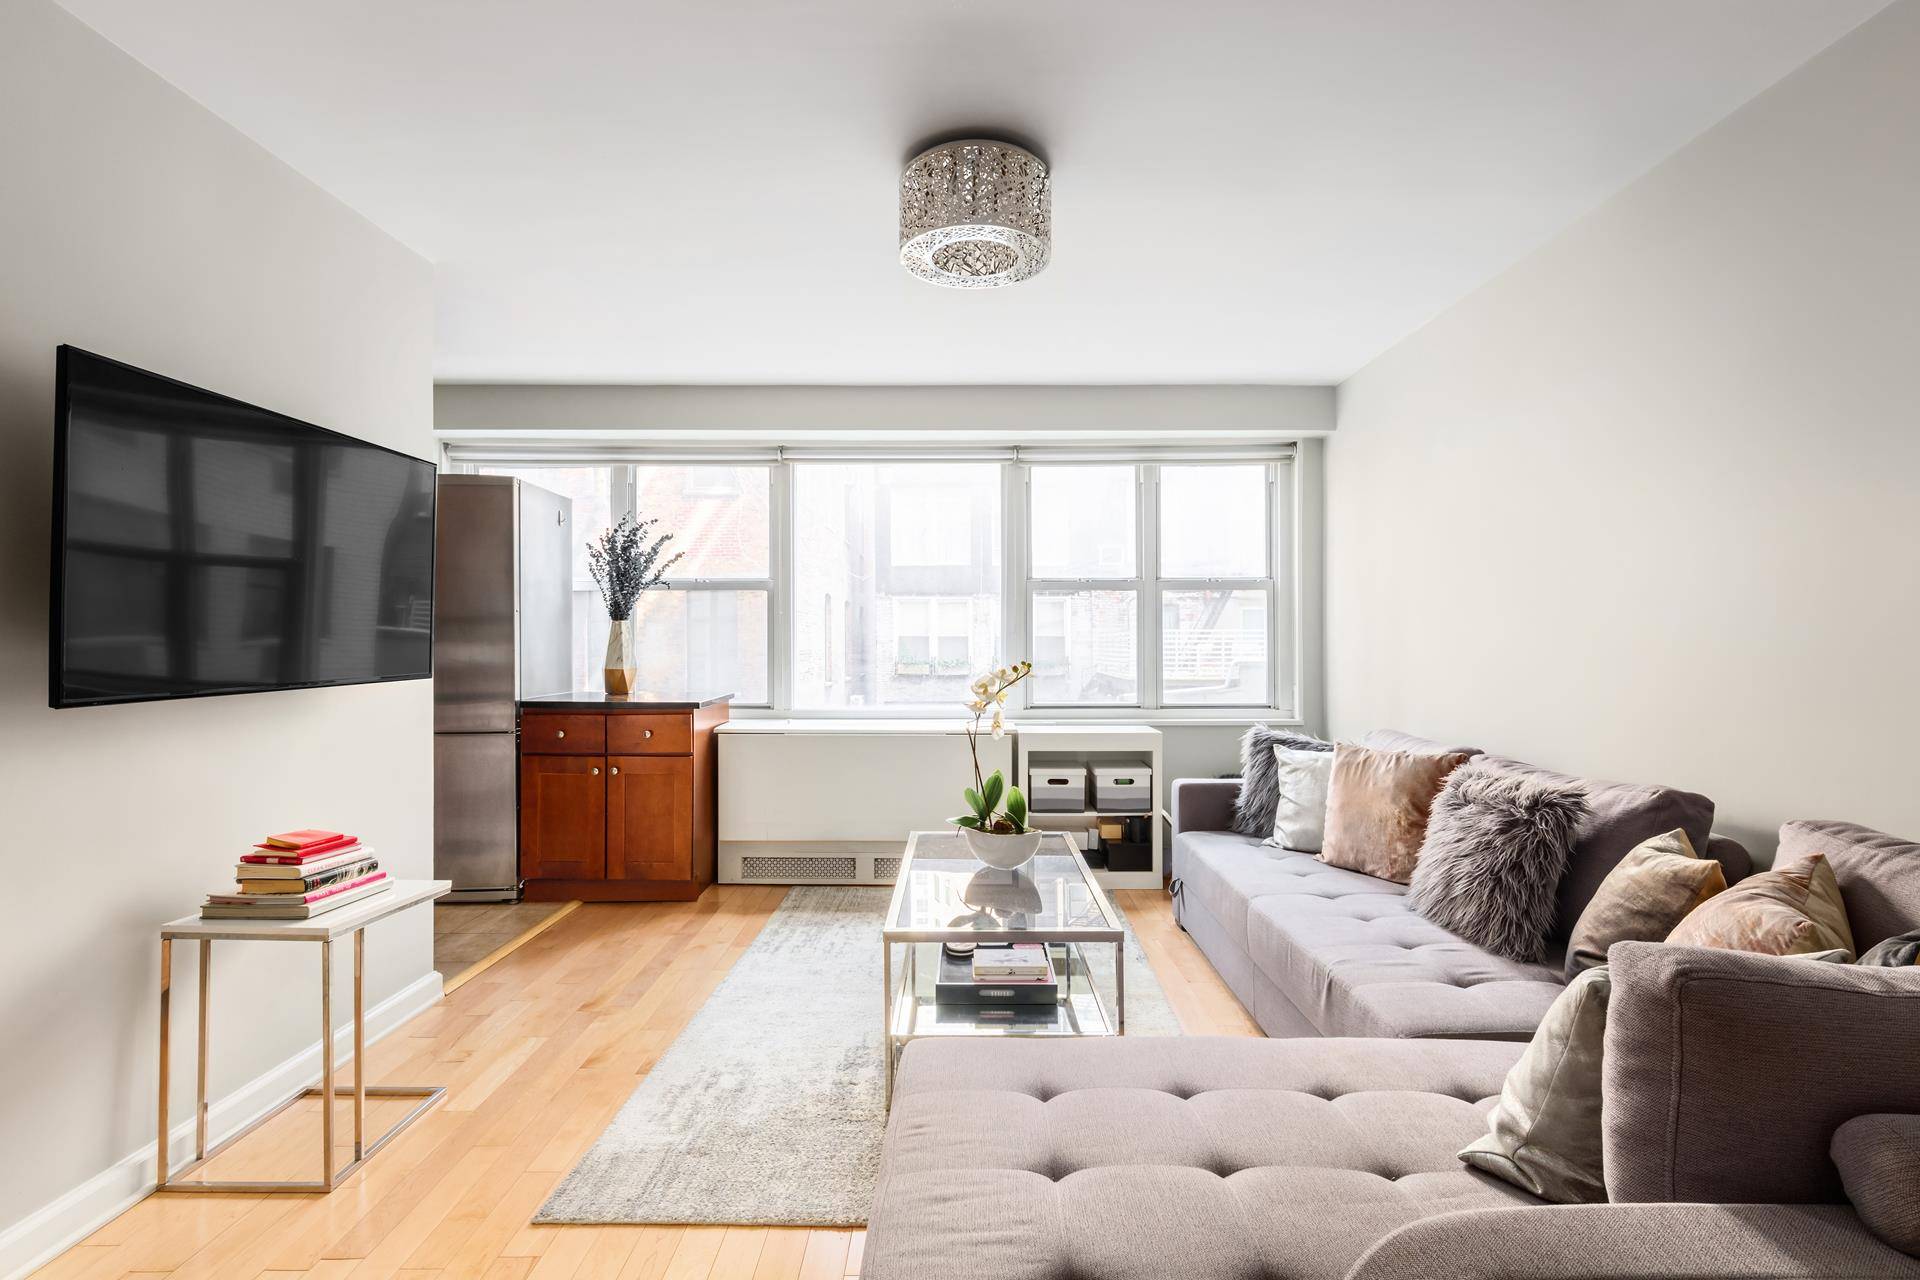 Charming studio located in Prime East Village, right off of Astor Place and just a short distance from Union Square, Washington Square and Tompkins Square Parks.